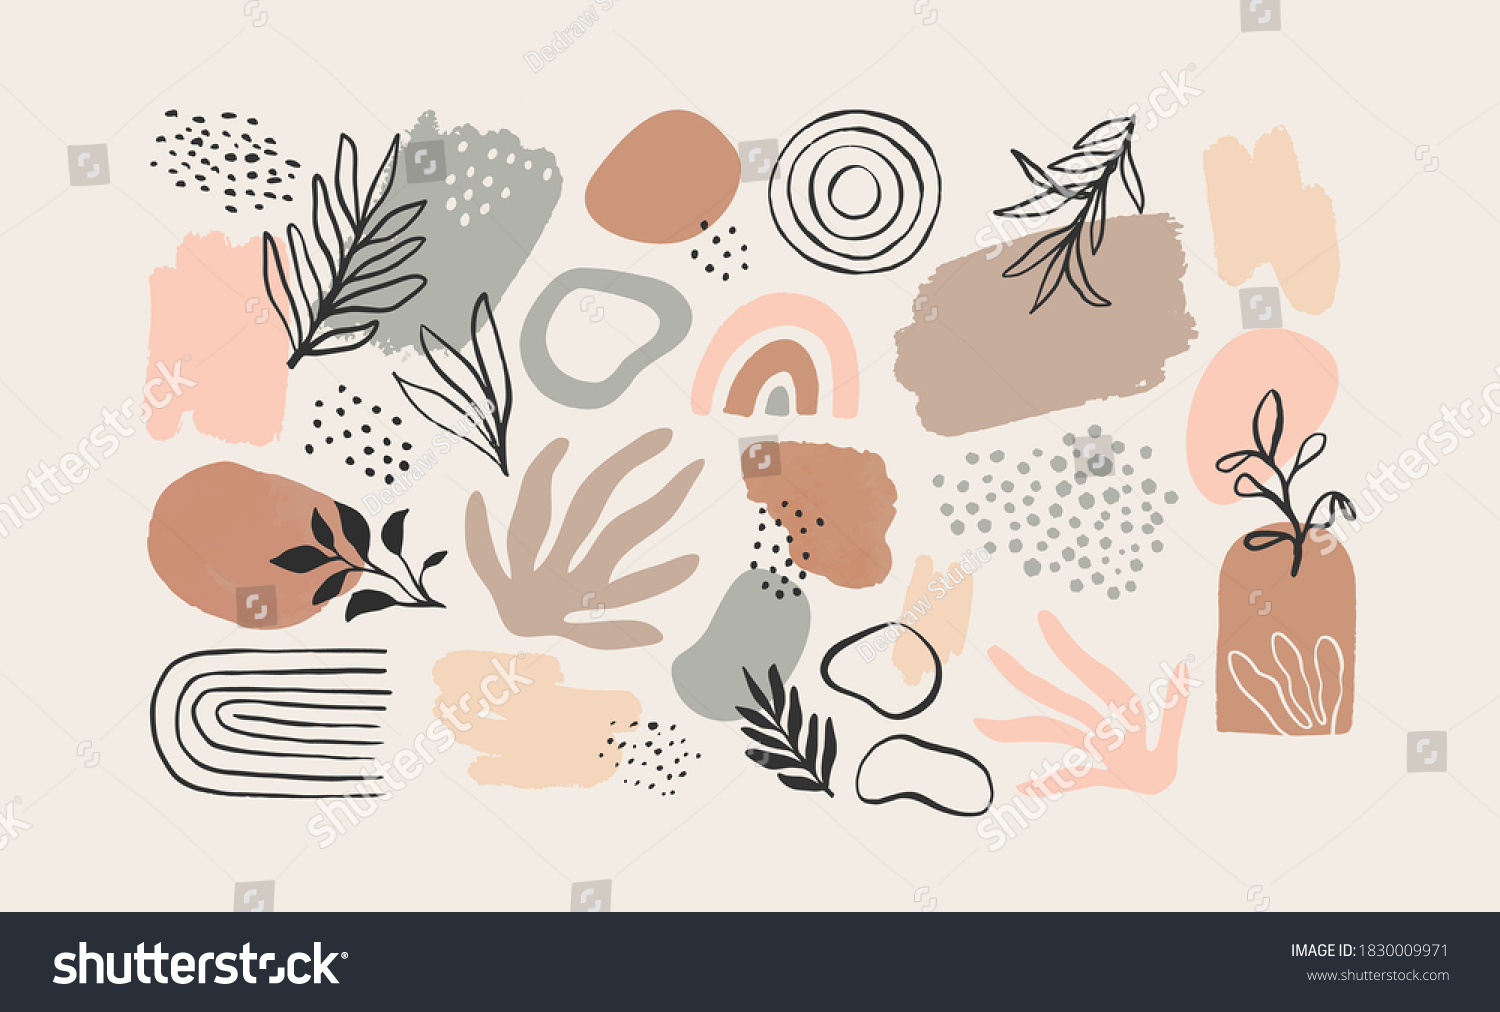 Minimalist abstract nature art shapes collection. Pastel color doodle bundle for fashion design, summer season or natural concept. Modern hand drawn plant leaf and tropical shape decoration set. #1830009971